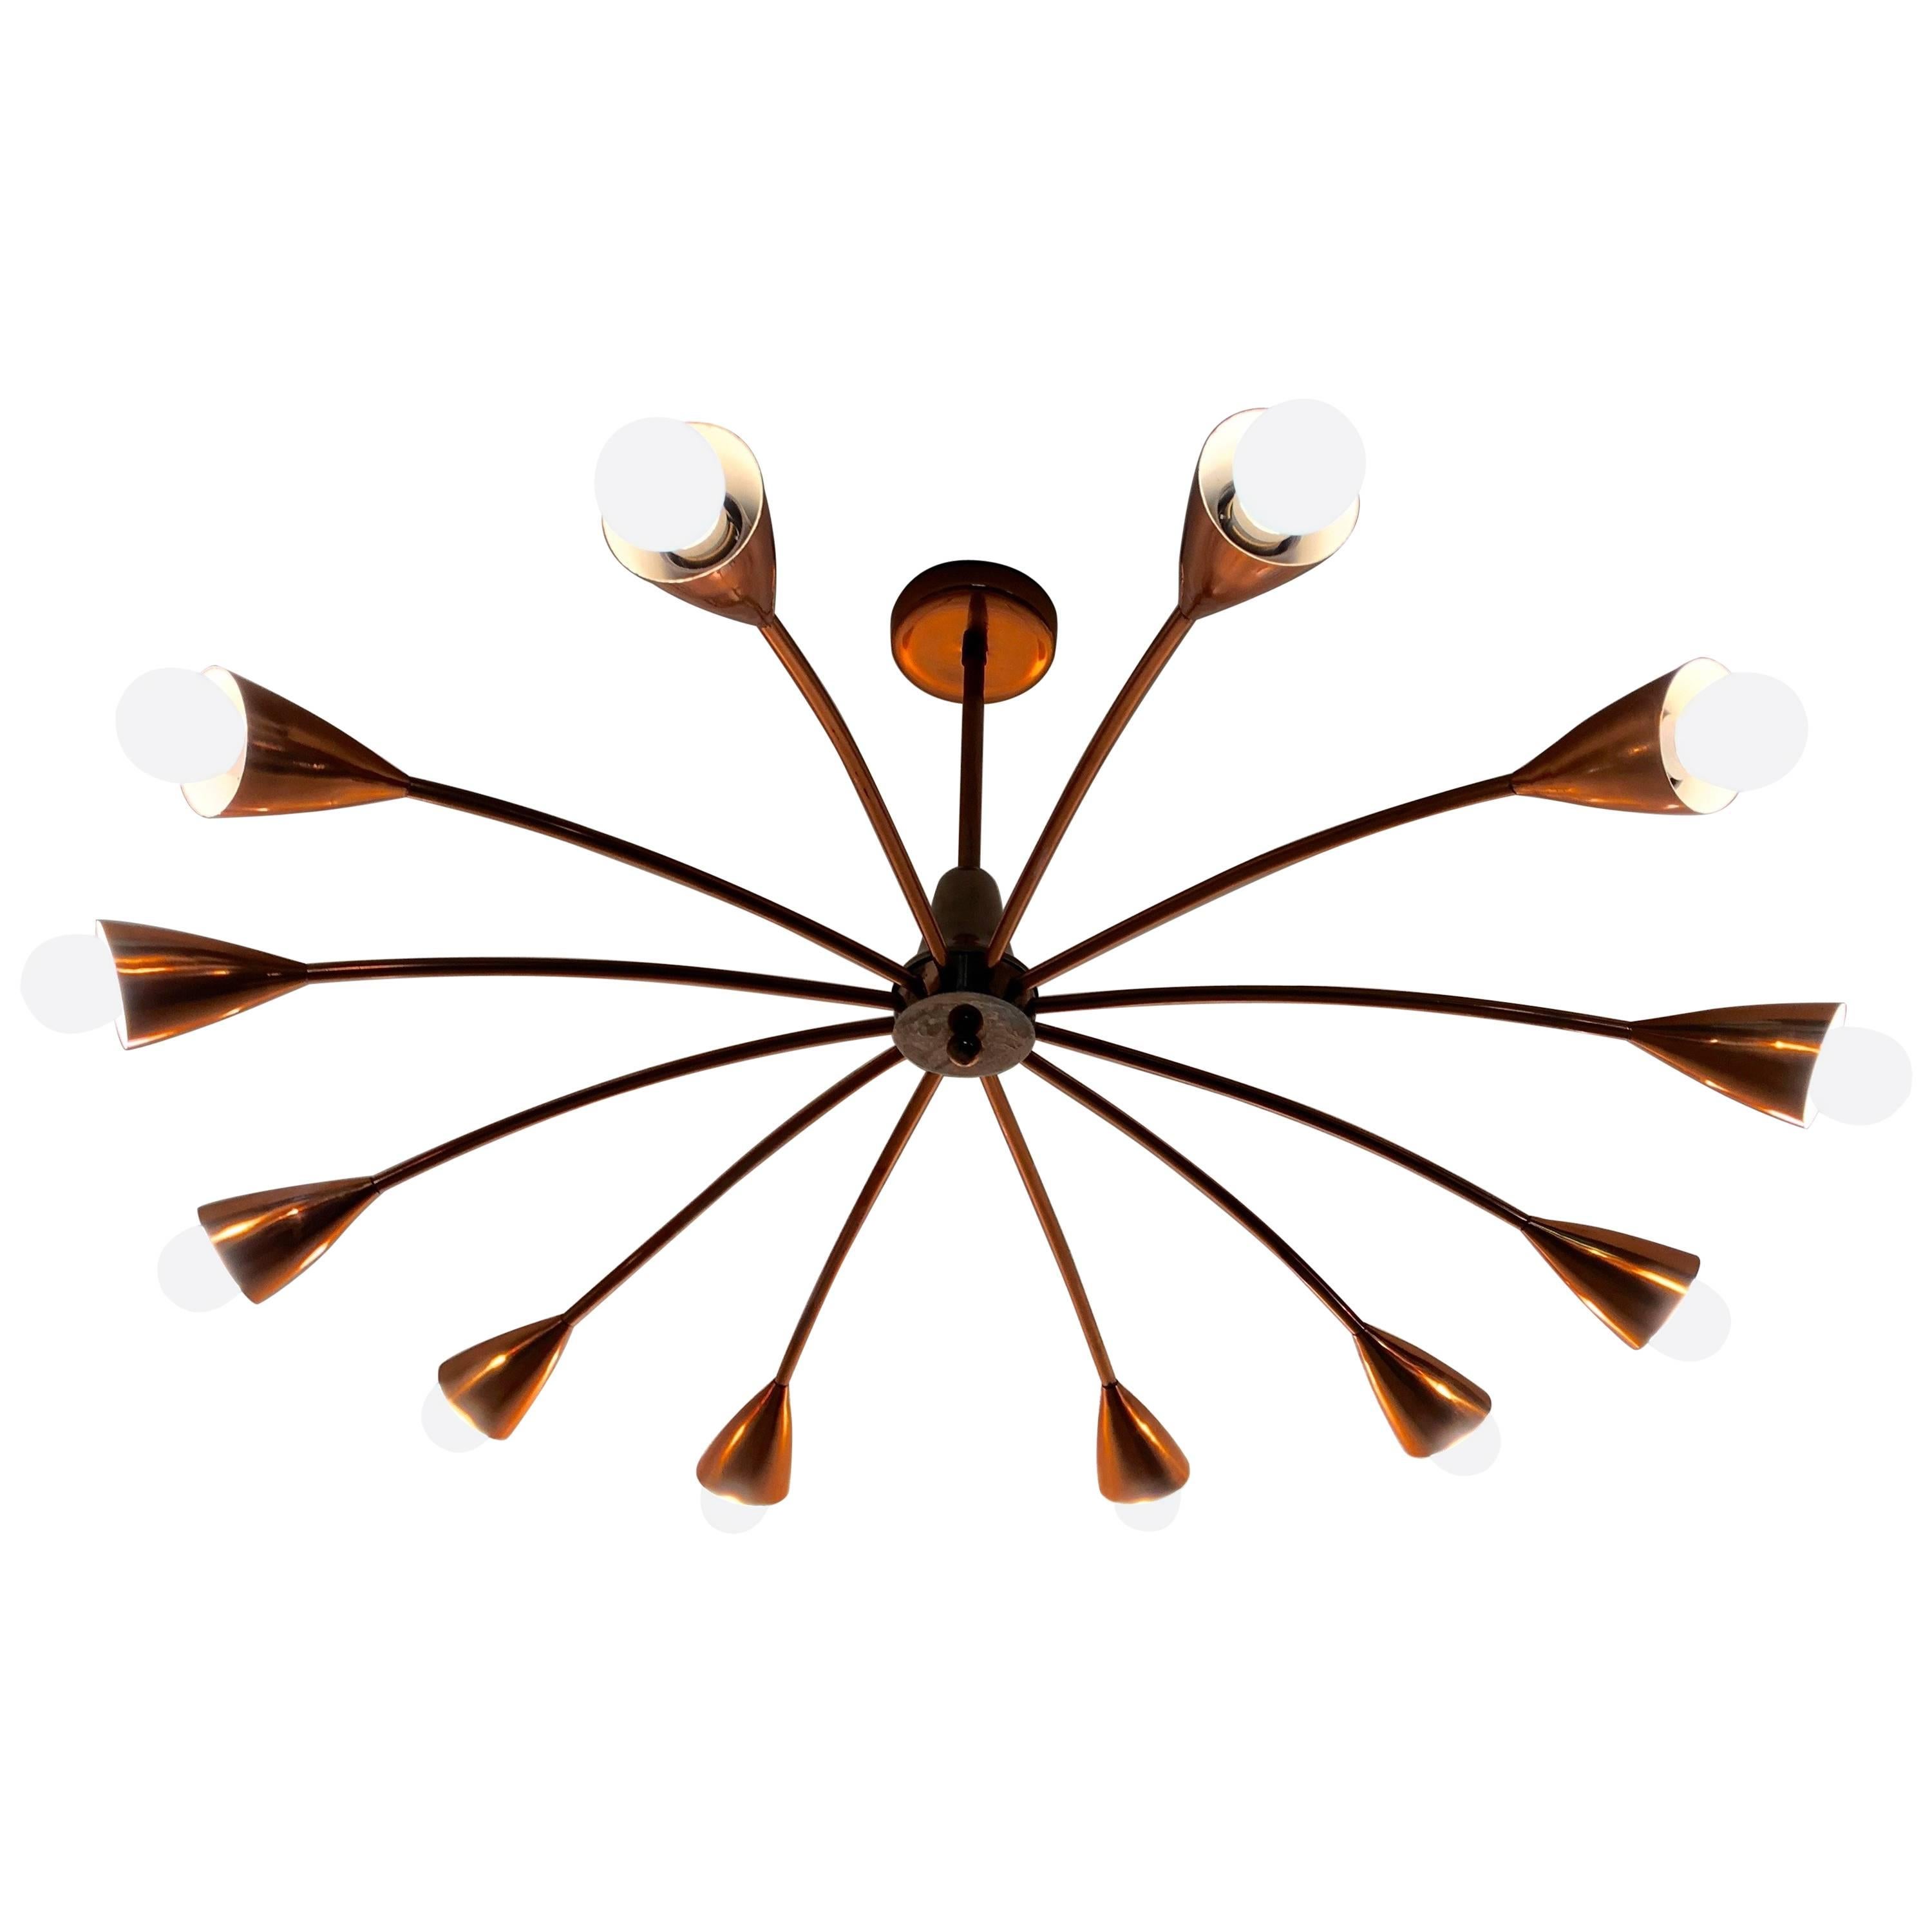 Brown Evans and Co. 'BECO' Copper Chandelier for Anatol Kagan, Melbourne 1950s